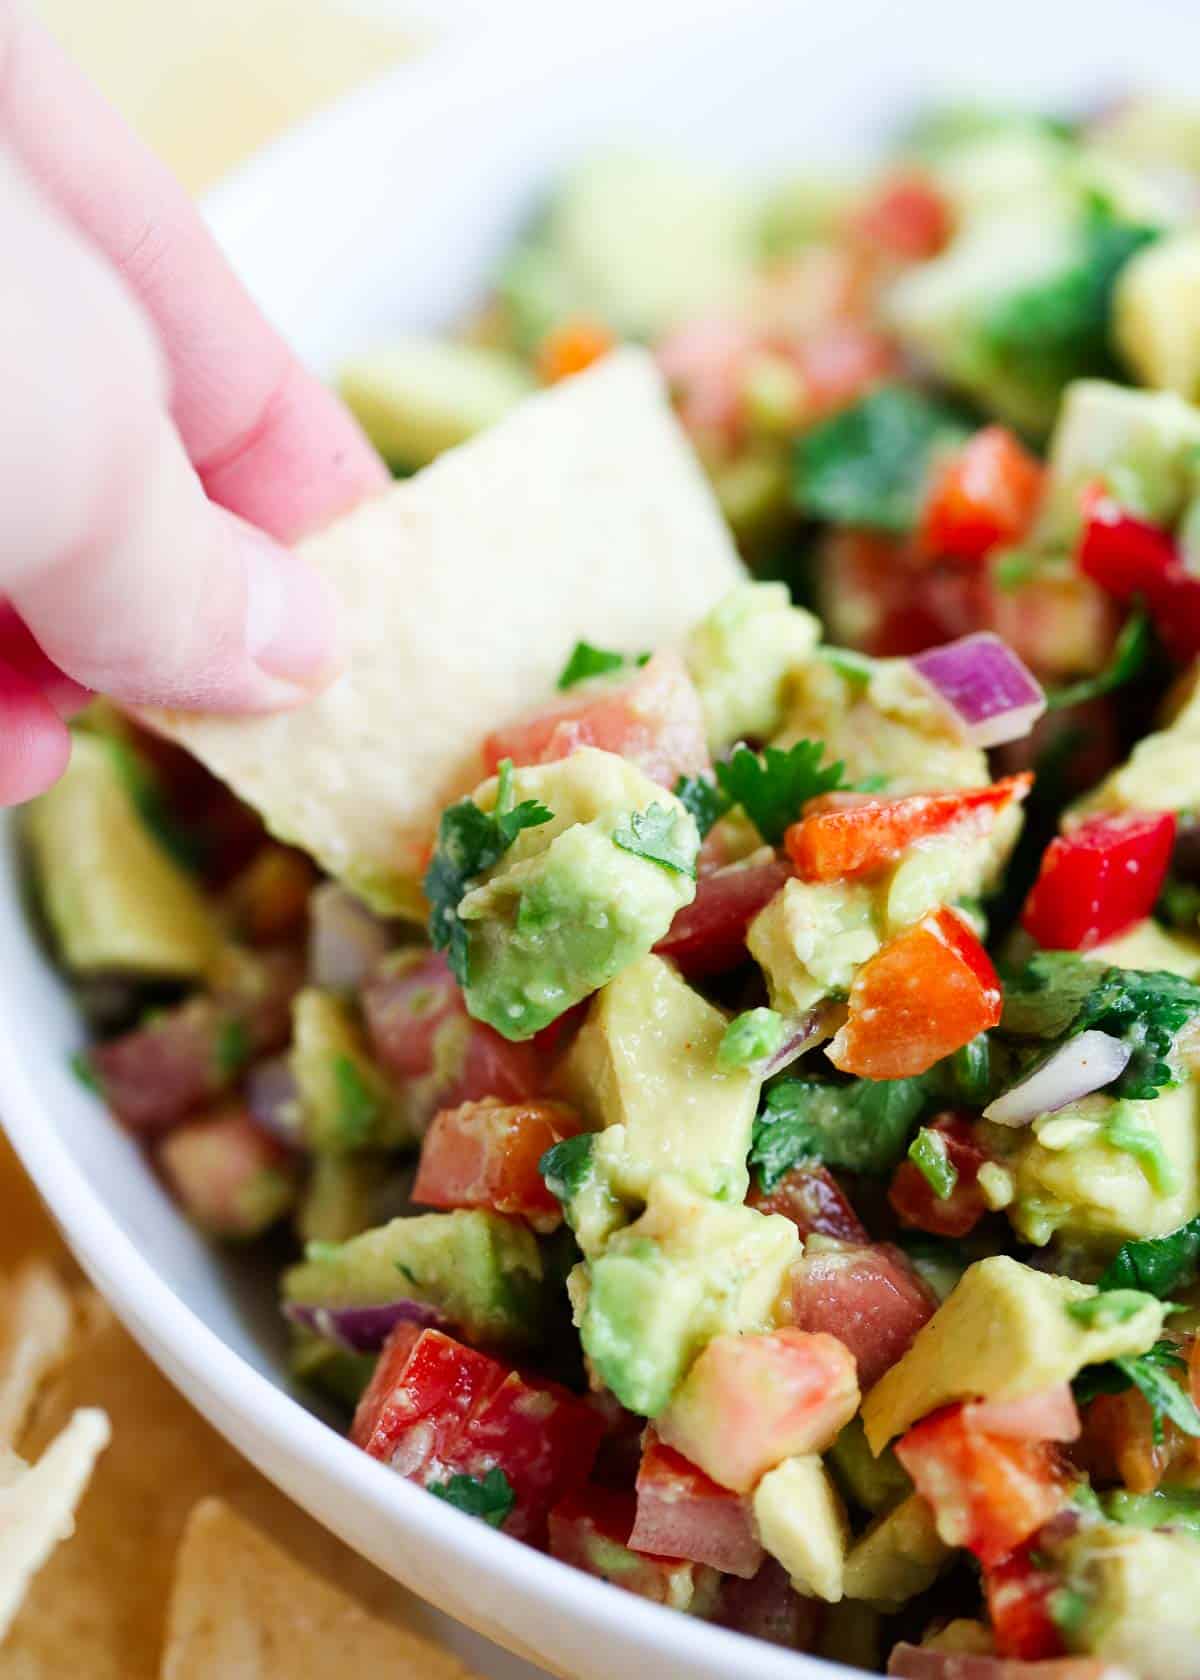 A tortilla chip being dipped into a bowl of avocado salsa.